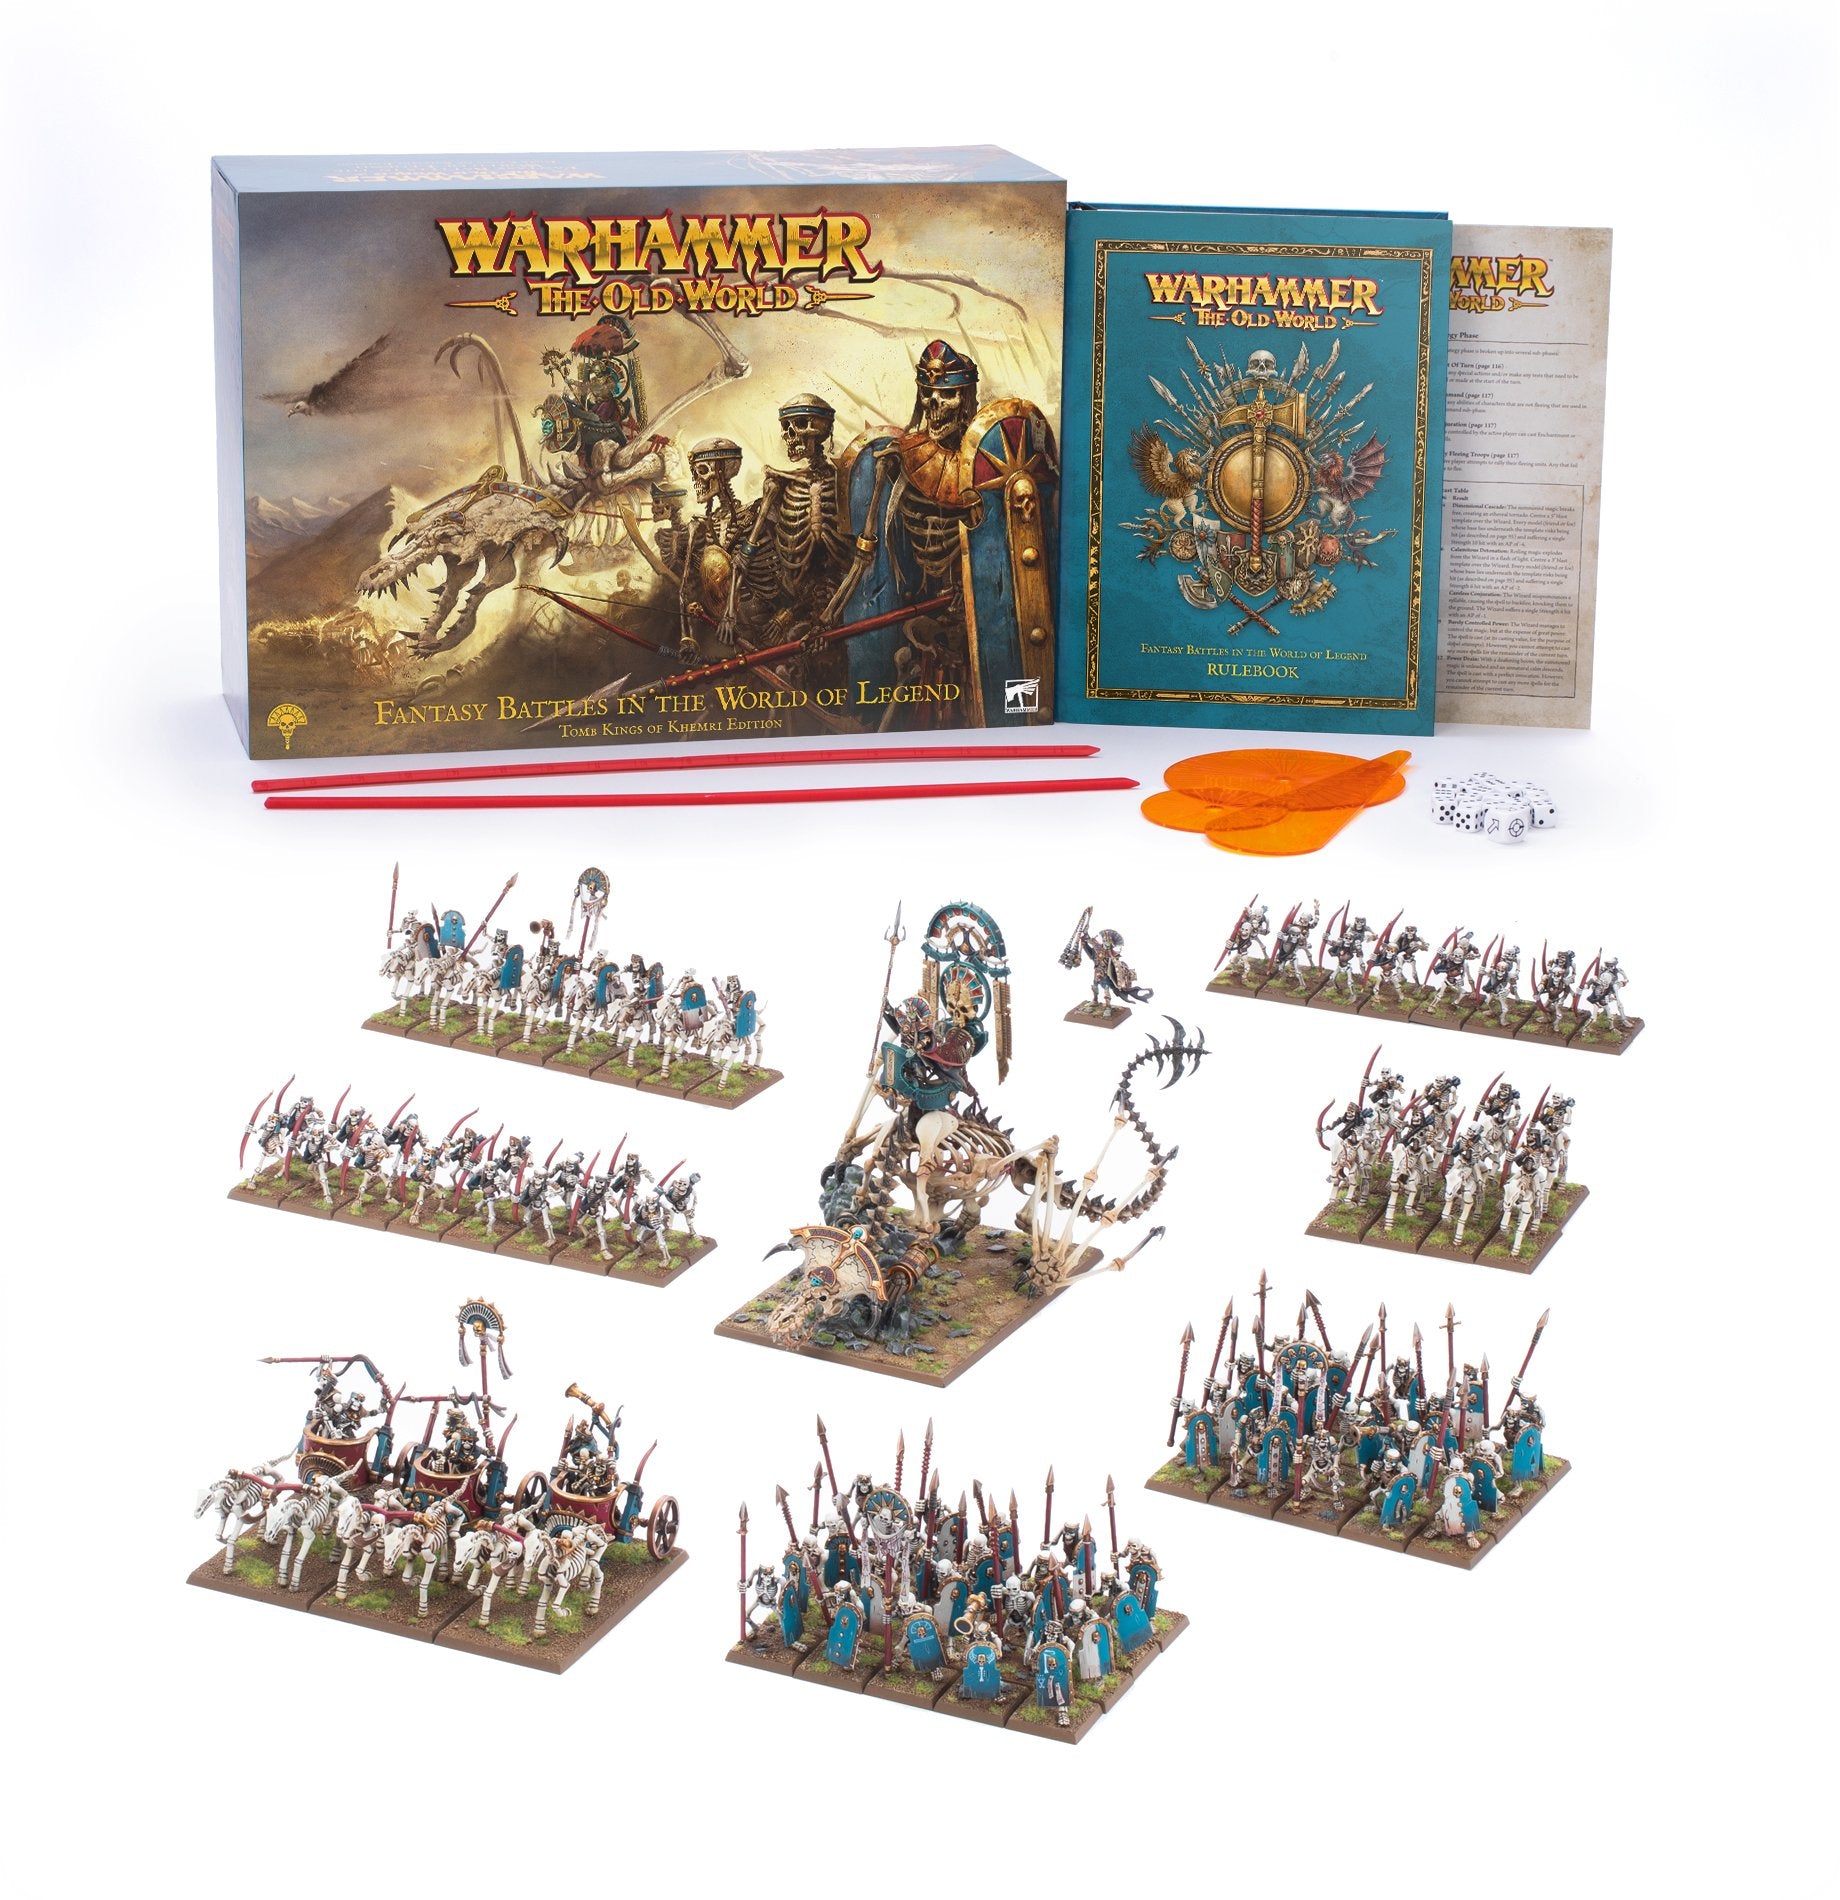 Warhammer The Old World: Core Set - Tomb Kings of Khemri Edition